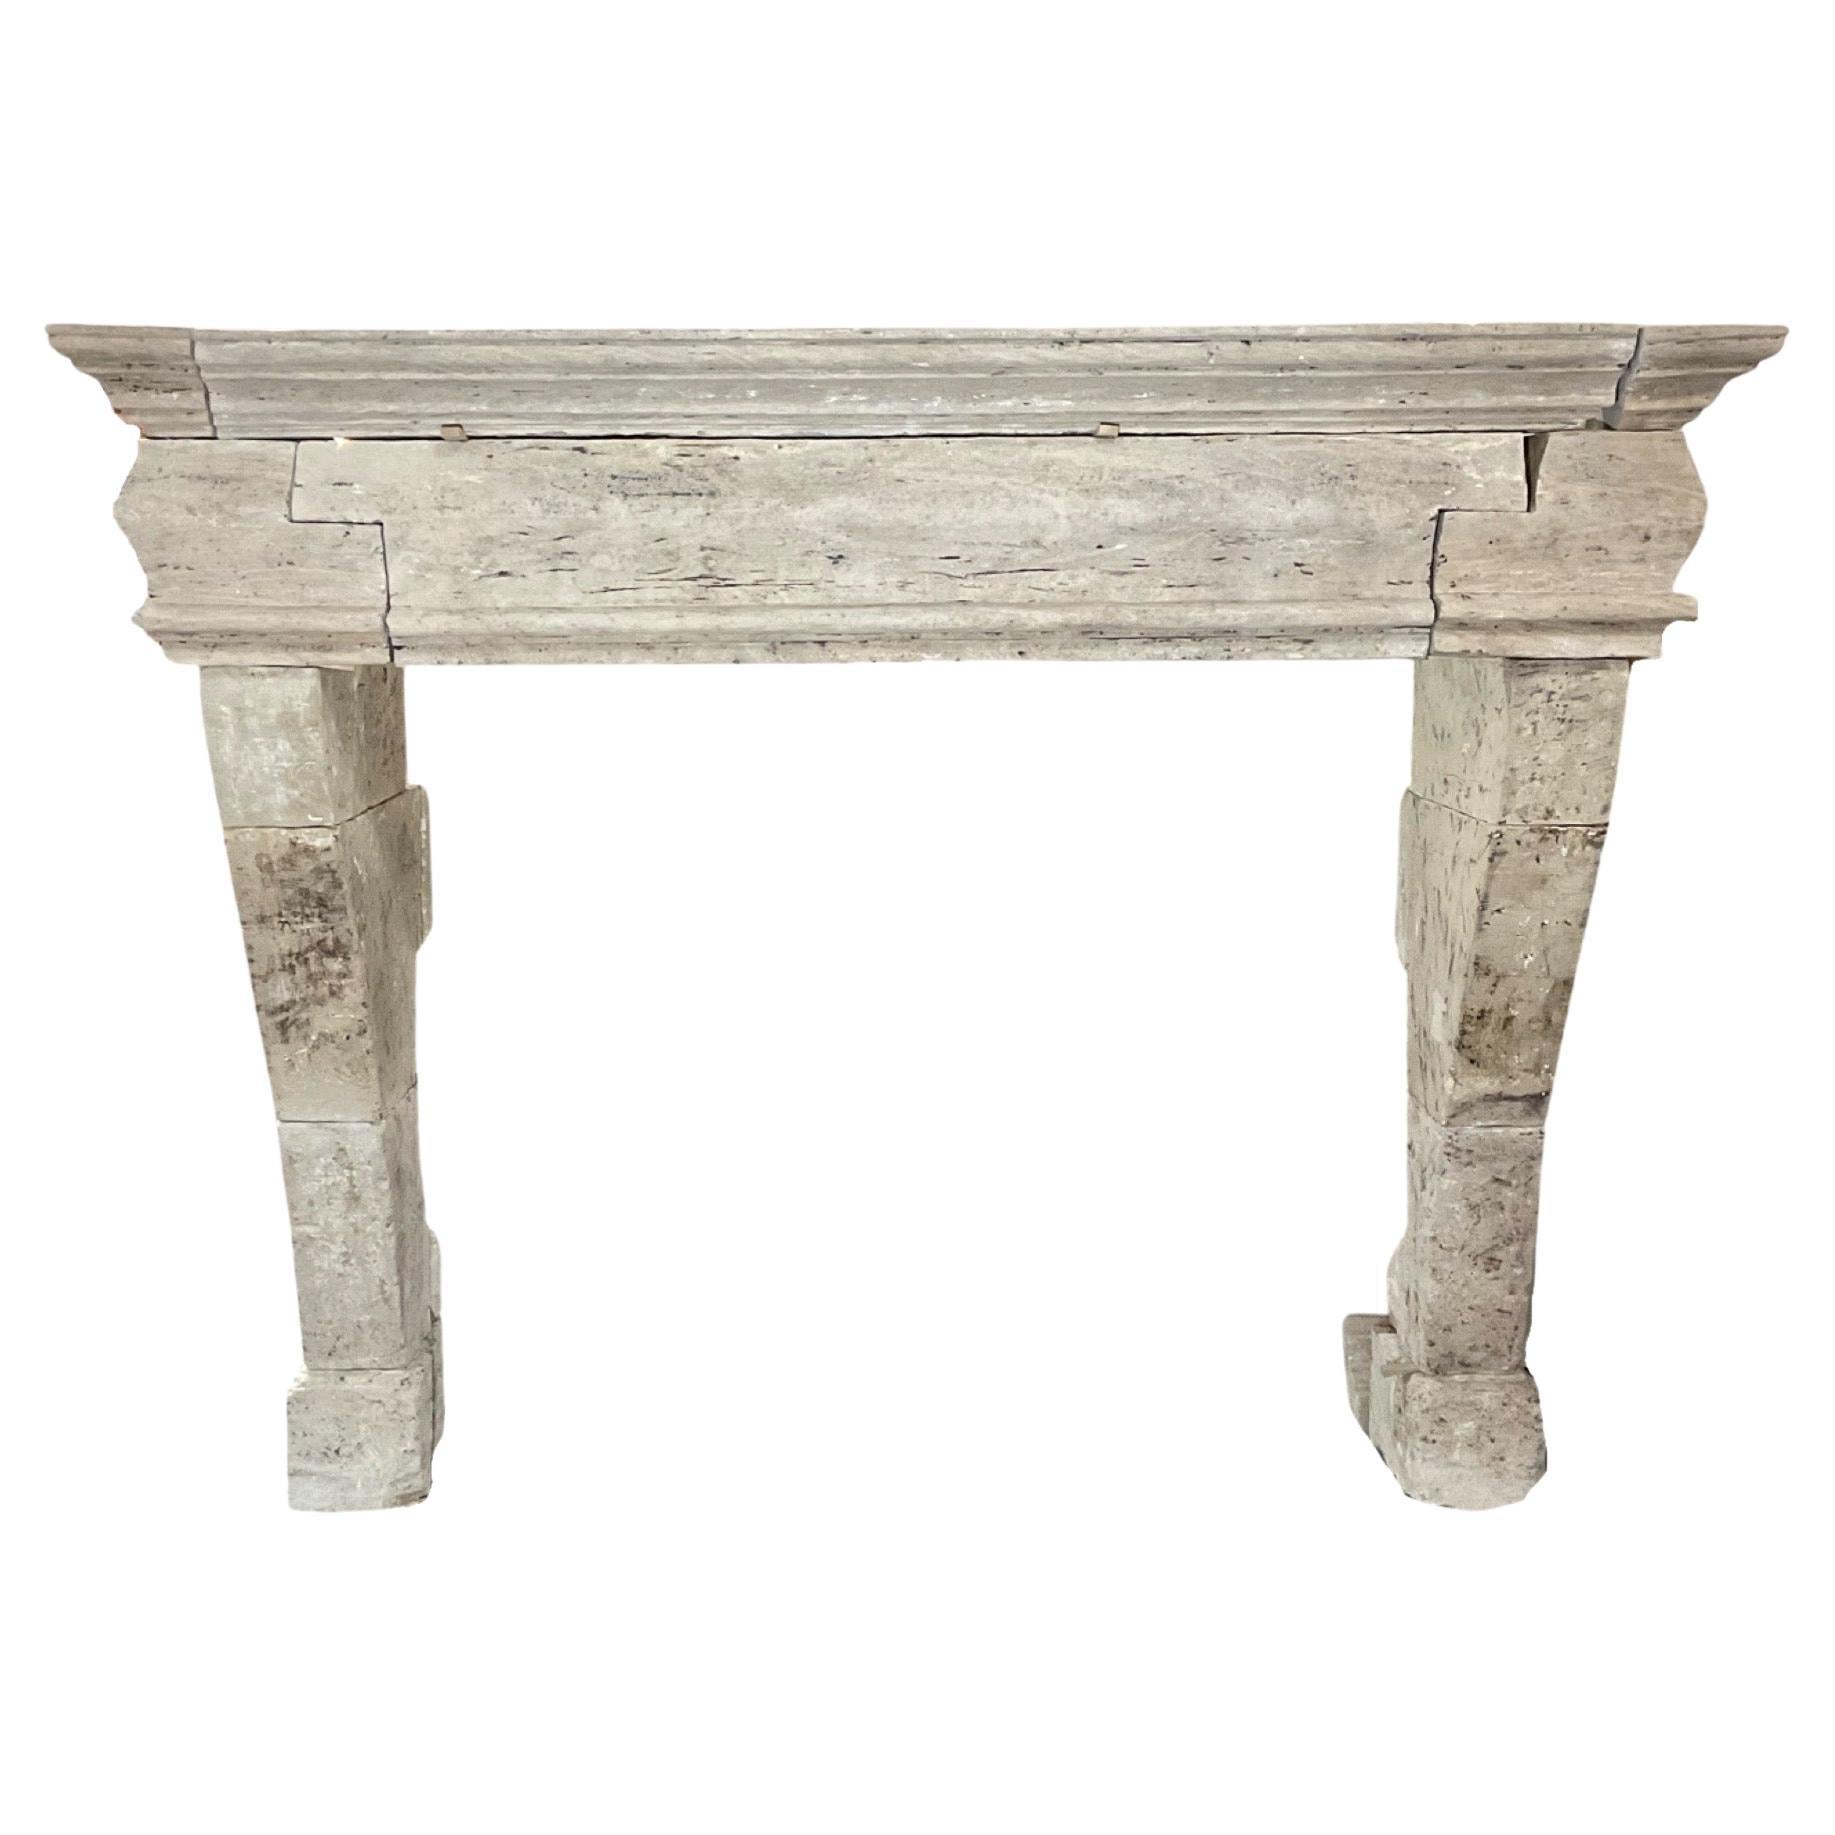 This authentic French Burgundy Limestone Mantel is a beautiful antique piece from the 1750s, featuring a Louis XVI-style design. Crafted from burgundy limestone, it adds a touch of elegance and history to any space. Expertly handmade in France, it's